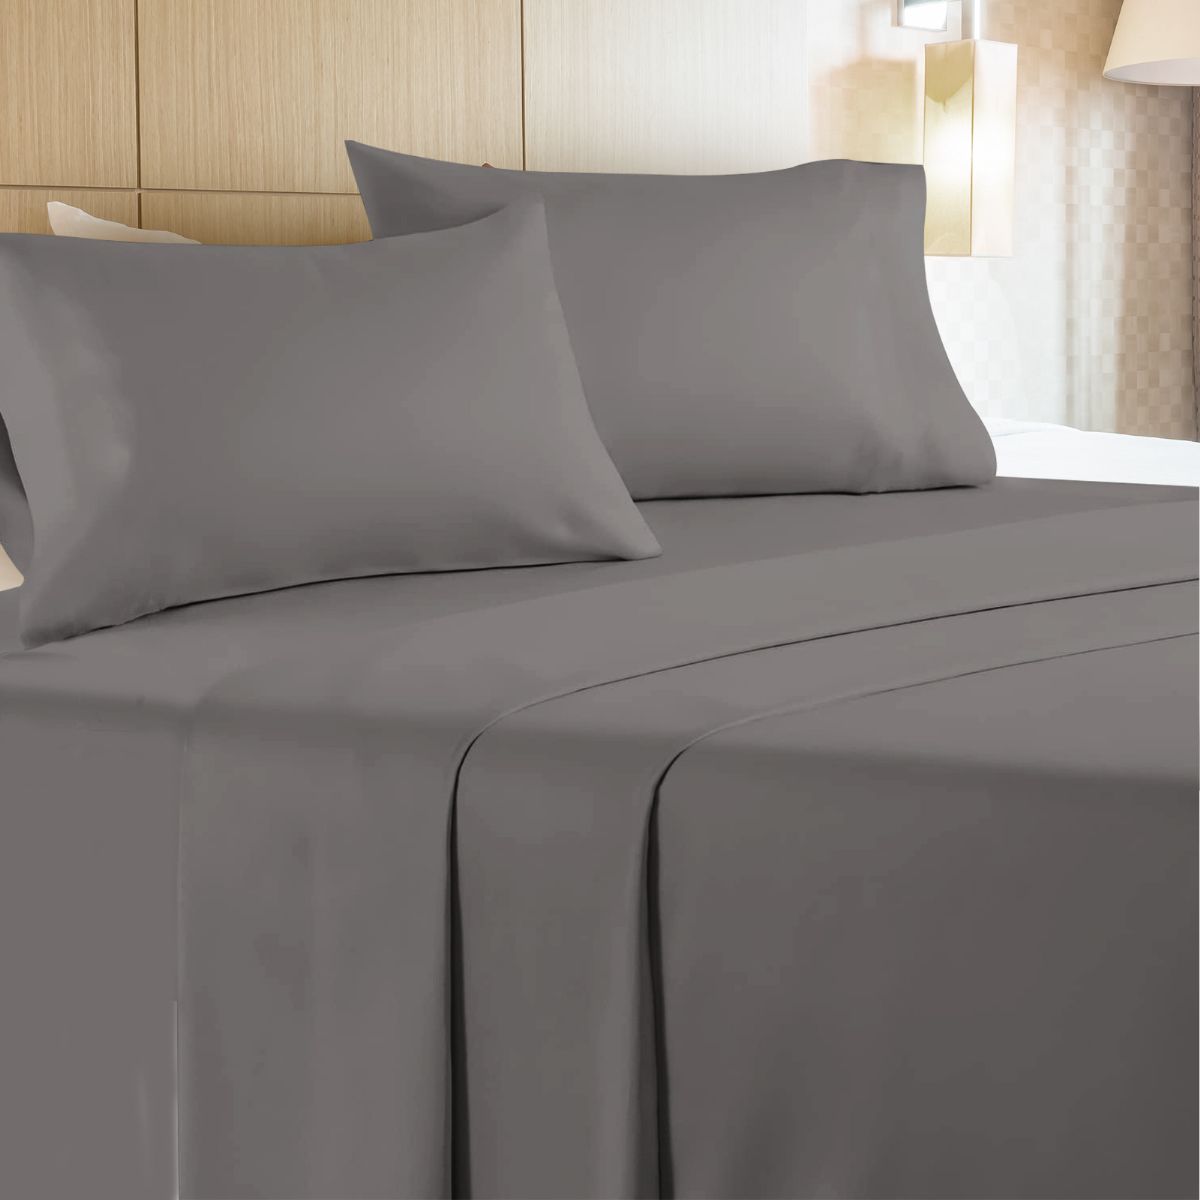 6 Sets of 4 Piece Microfiber Bed Sheet Set Twin Size In Charcoal